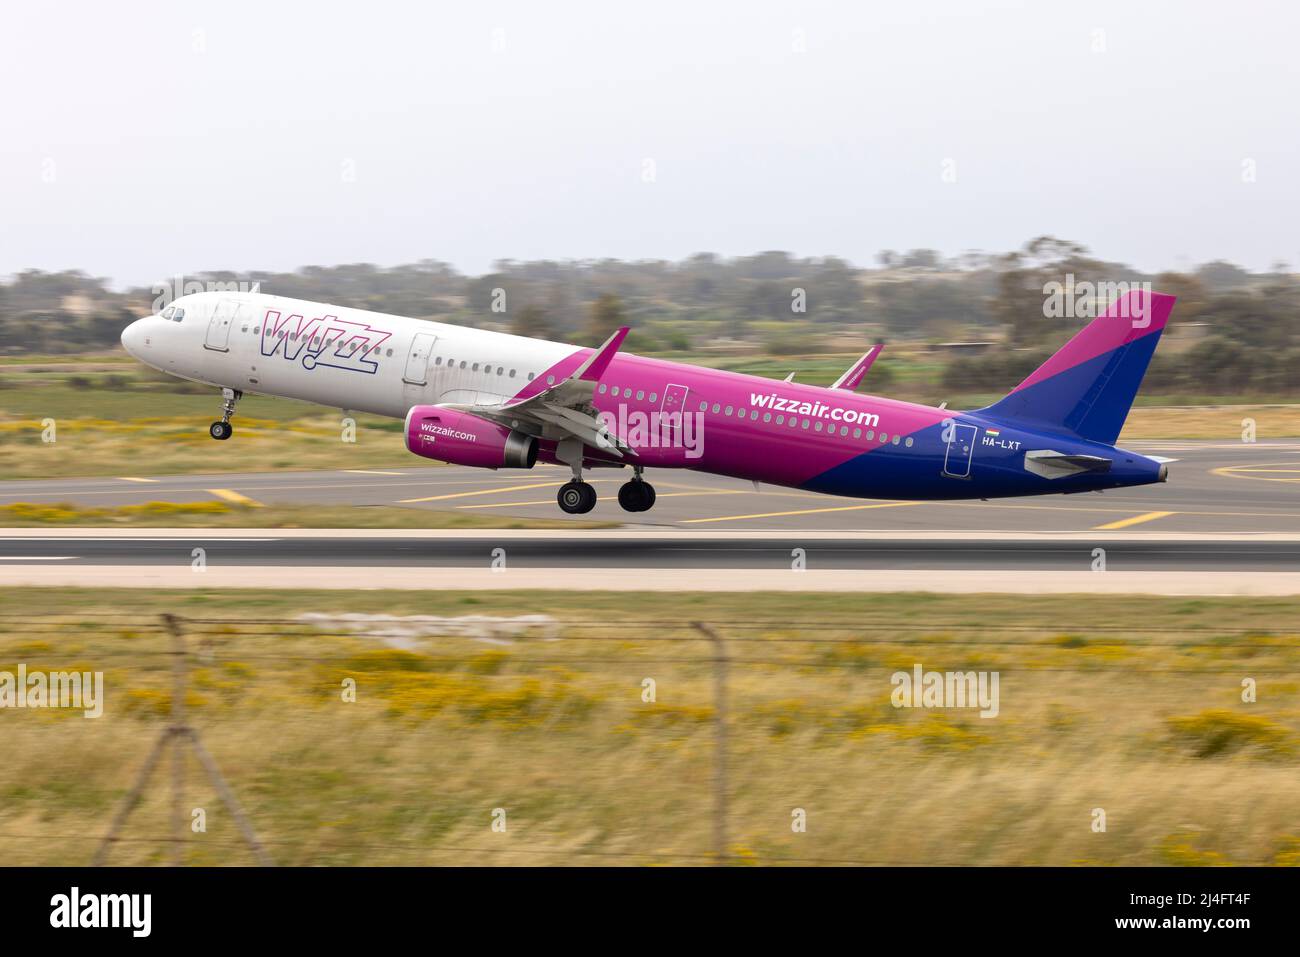 Wizz Air Airbus A321-231 (REG: HA-LXT) lifting off from runway 13, destination: Warsaw, Poland. Stock Photo